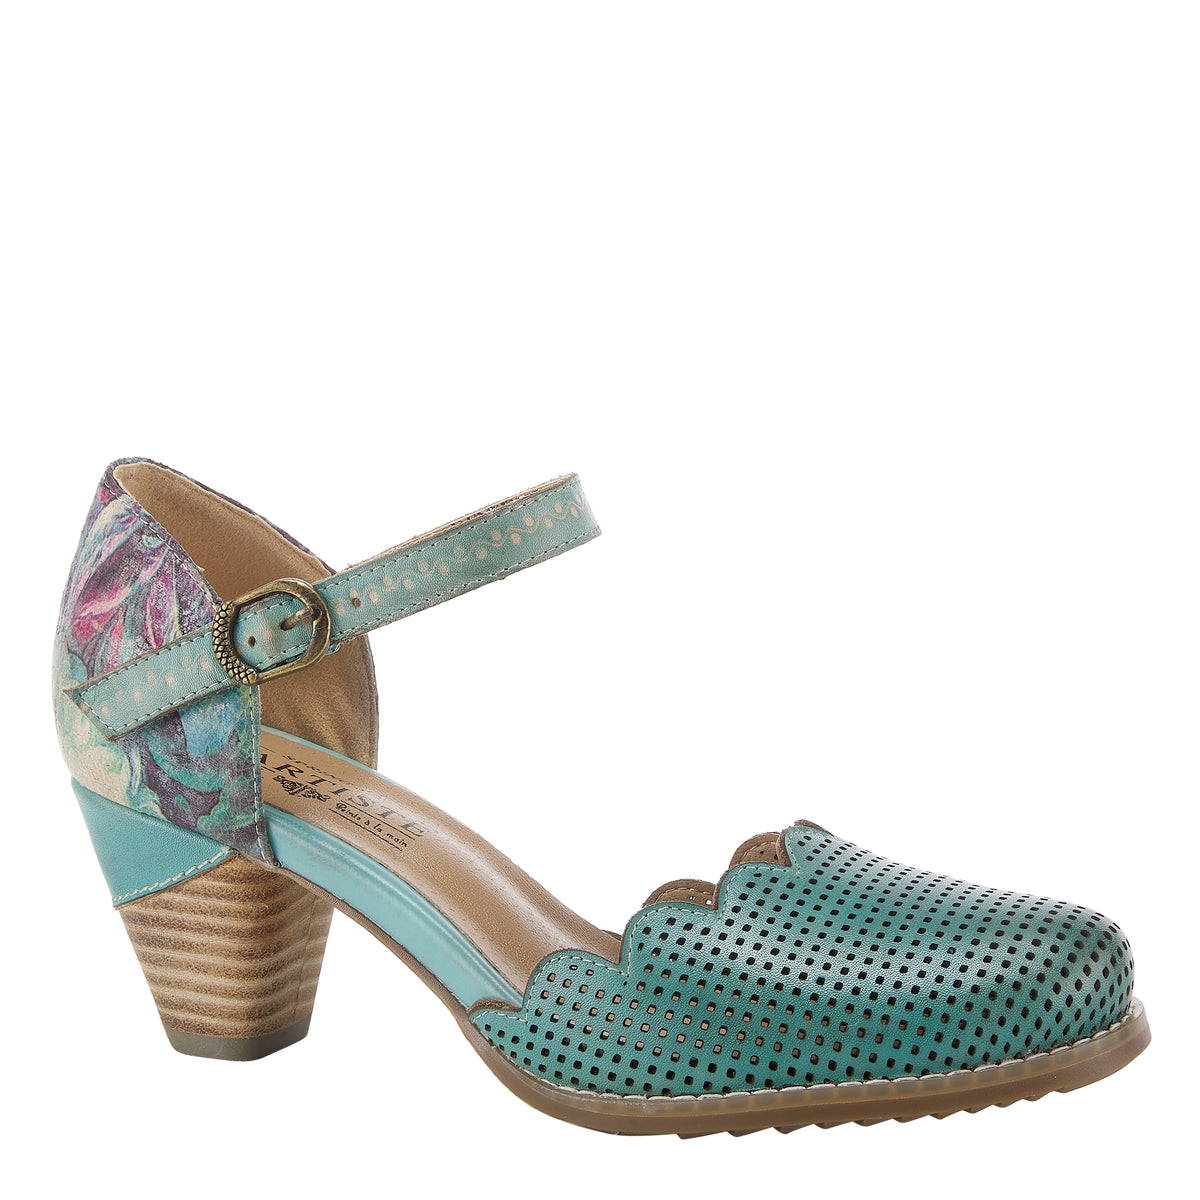 PARCHELLE MARY JANE SHOE by L'ARTISTE – Spring Step Shoes